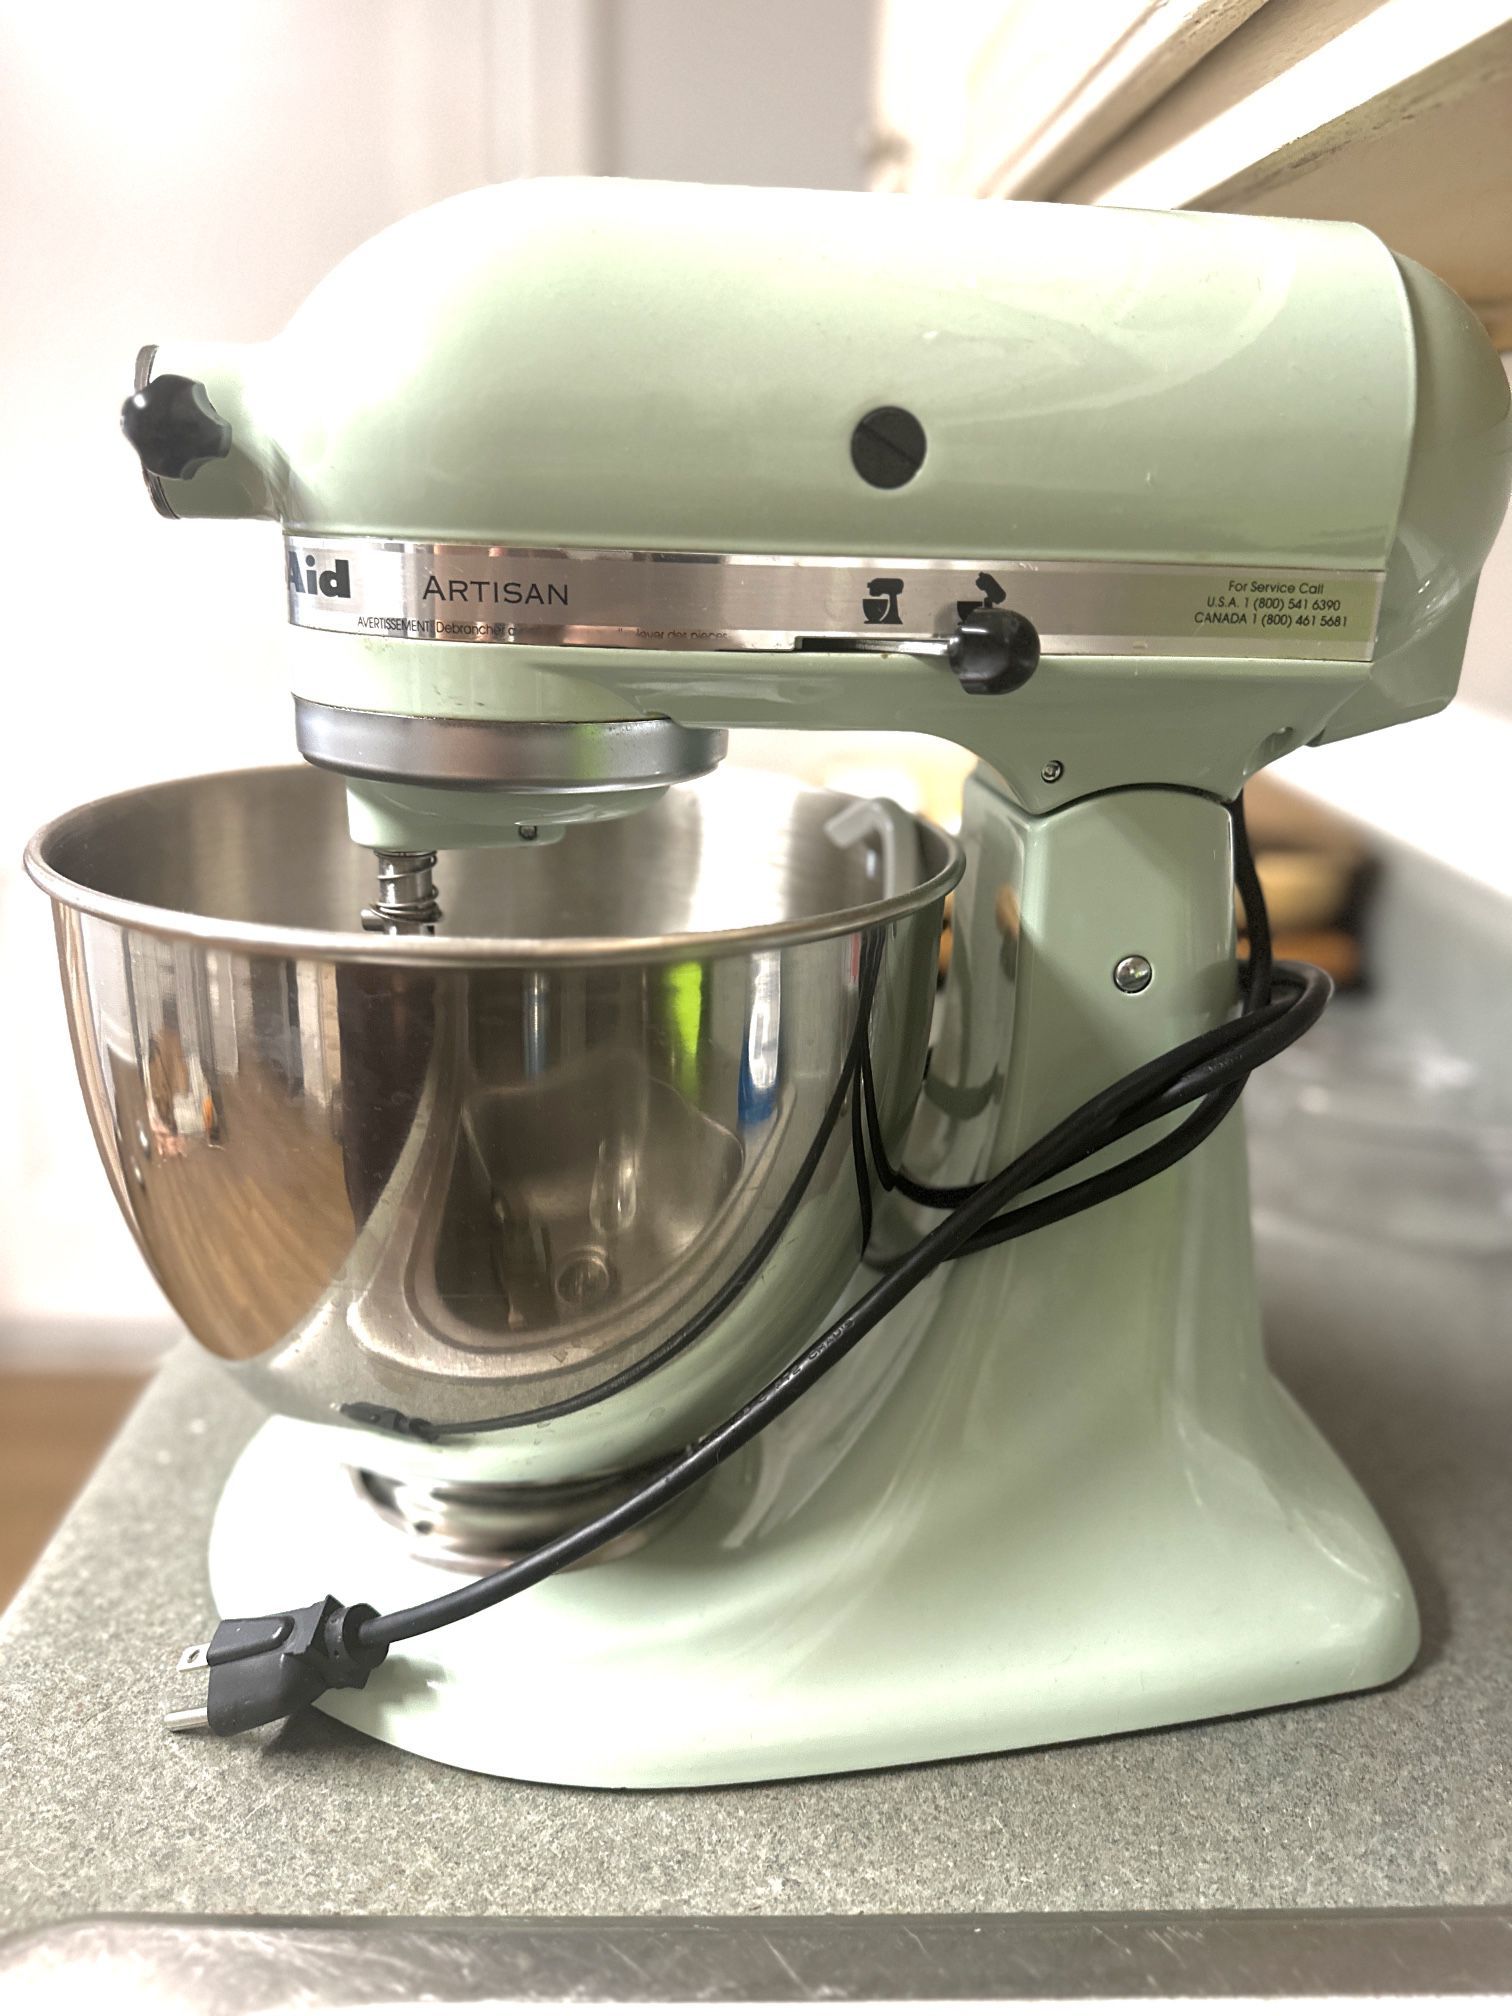 KitchenAid 5.5 Quart Bowl-Lift Stand Mixer - KSM55 - Matte Black for Sale  in North Wales, PA - OfferUp